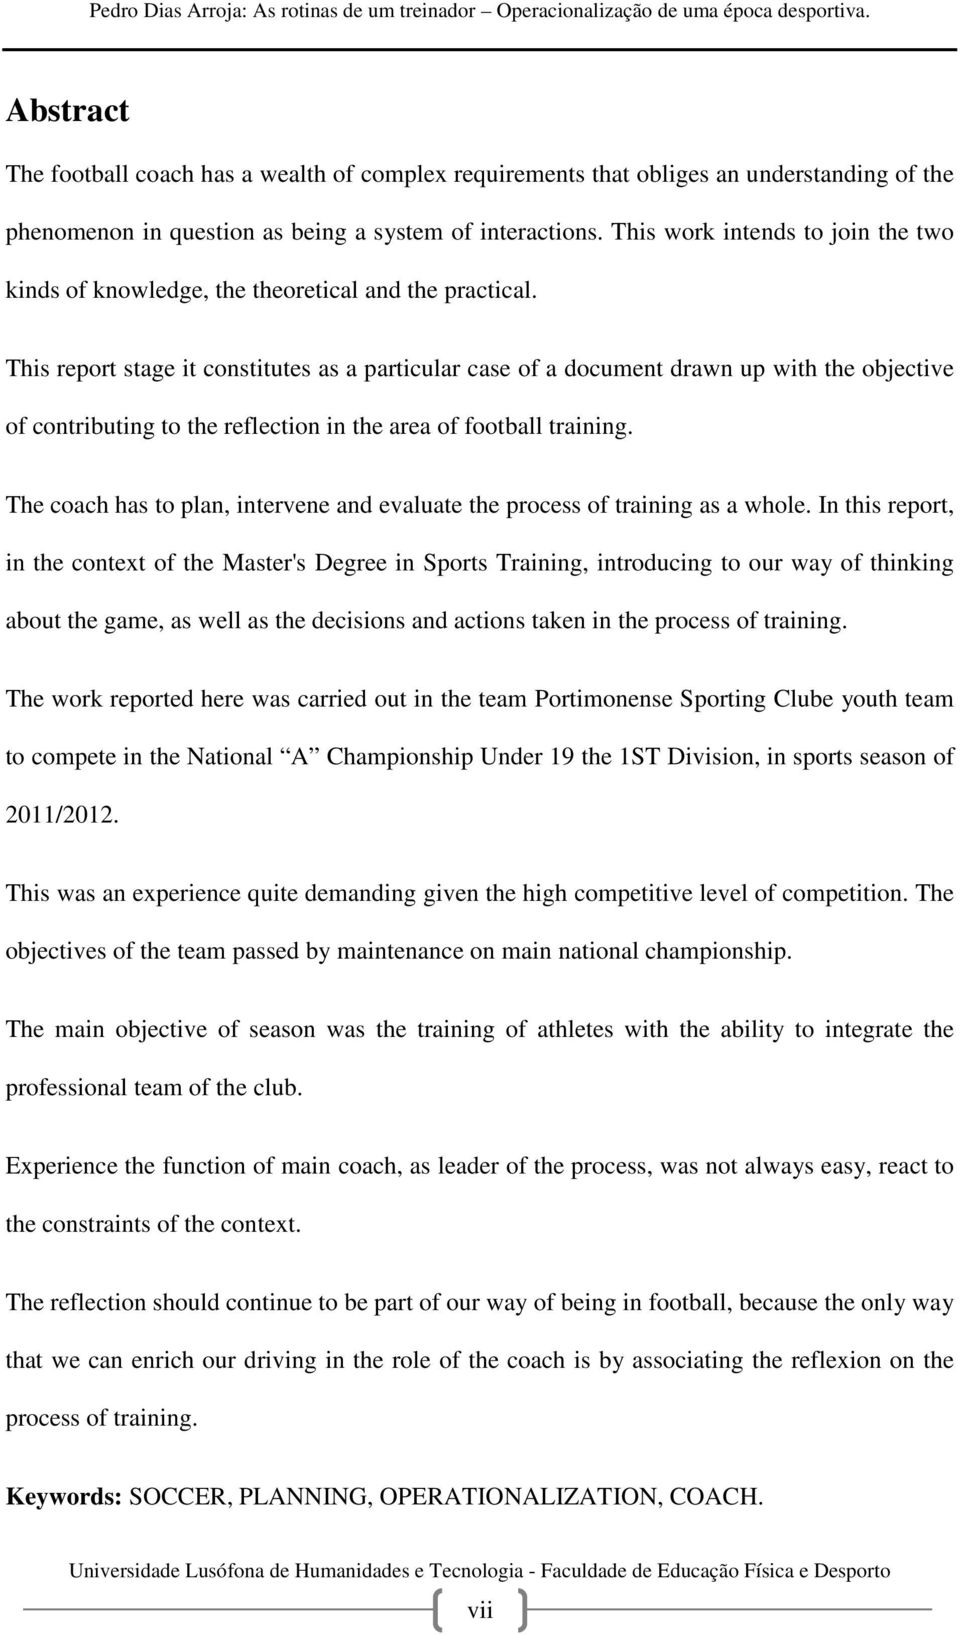 This report stage it constitutes as a particular case of a document drawn up with the objective of contributing to the reflection in the area of football training.